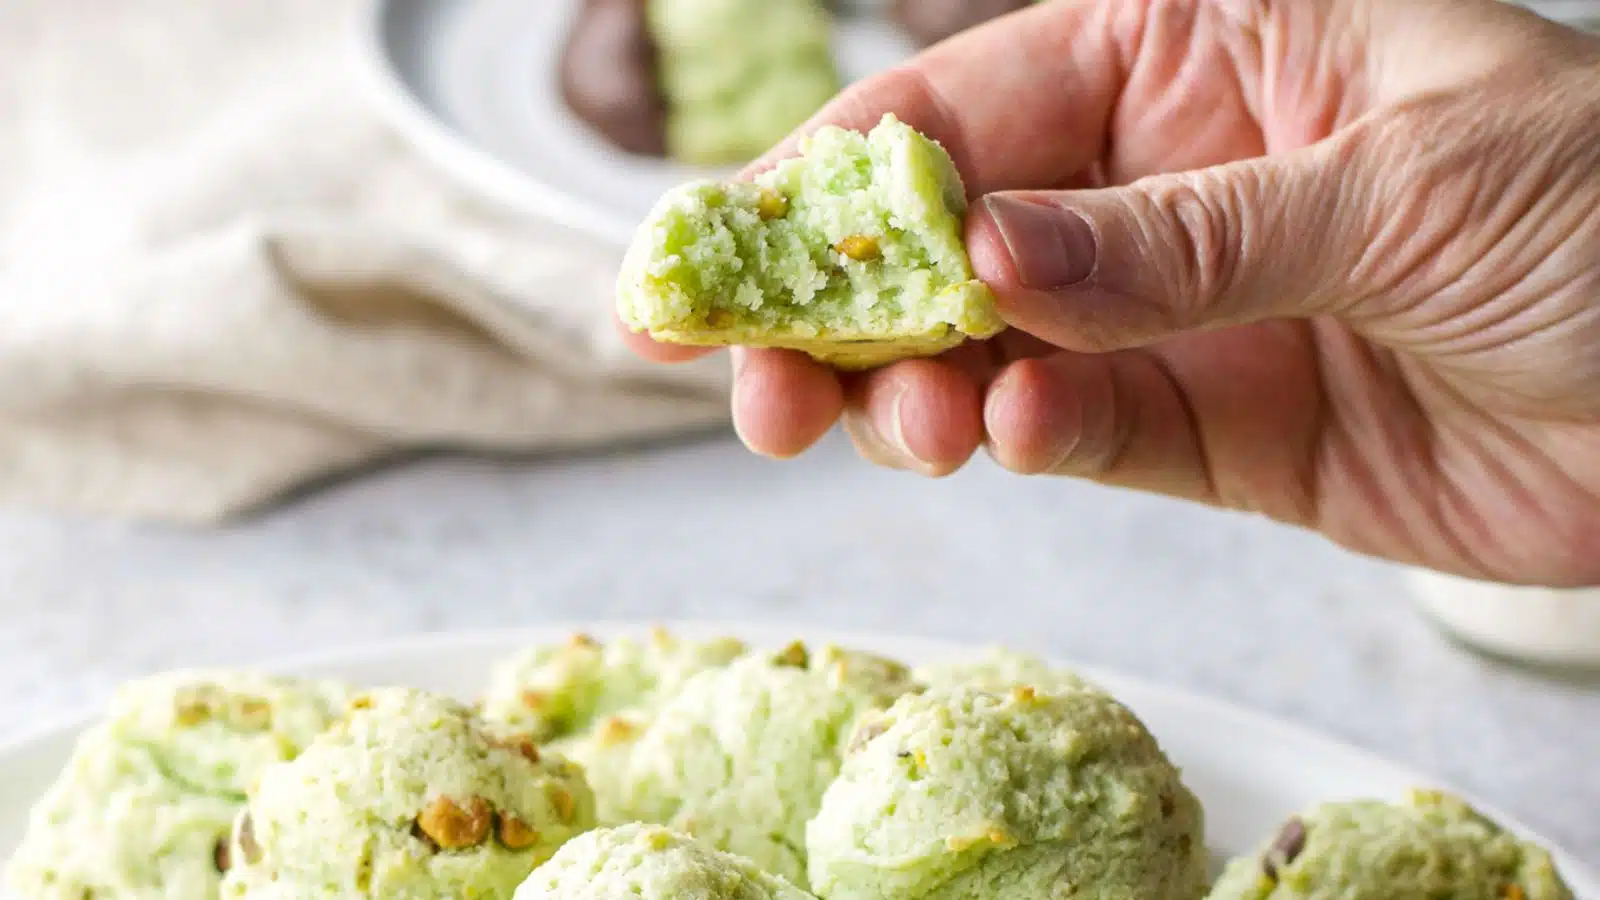 A hand holding a pistachio cookie with a bite out of it held over a plate of cookies